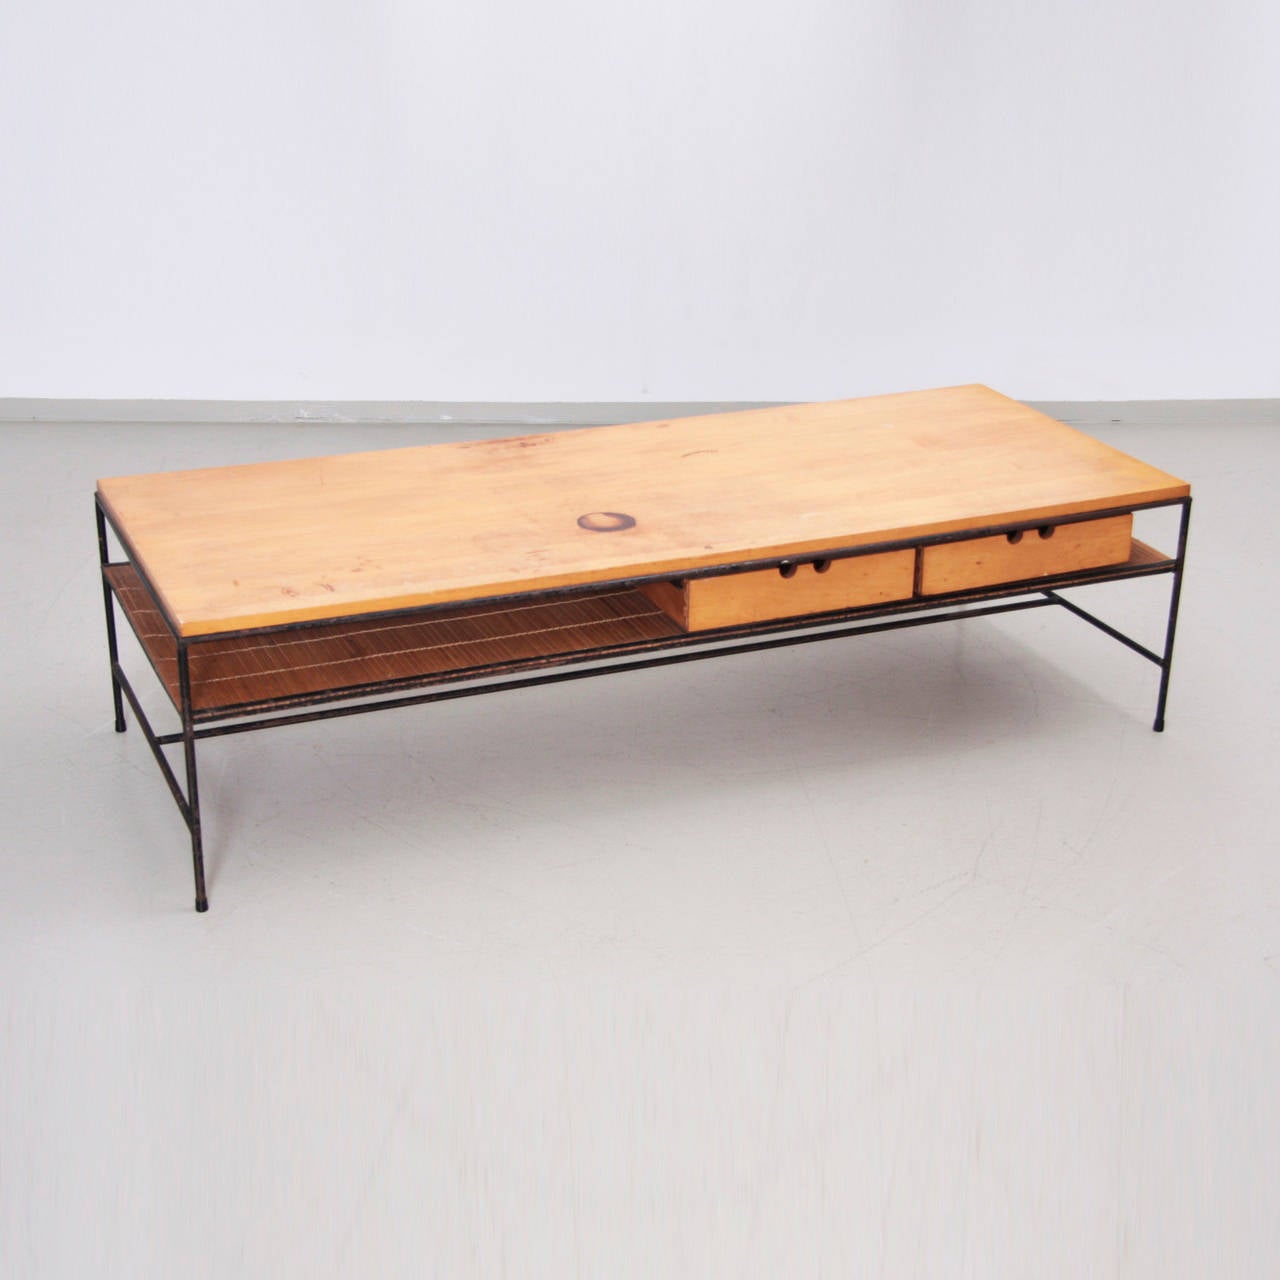 Hard to find early unrestaured version of the work of Paul McCobb Planner Group, for Winchendon Furniture. Vintage condition. Solid maple top, over two drawers and chic bamboo shelf. Wrought Iron frame. Nice big rectangular coffee, cocktail table.